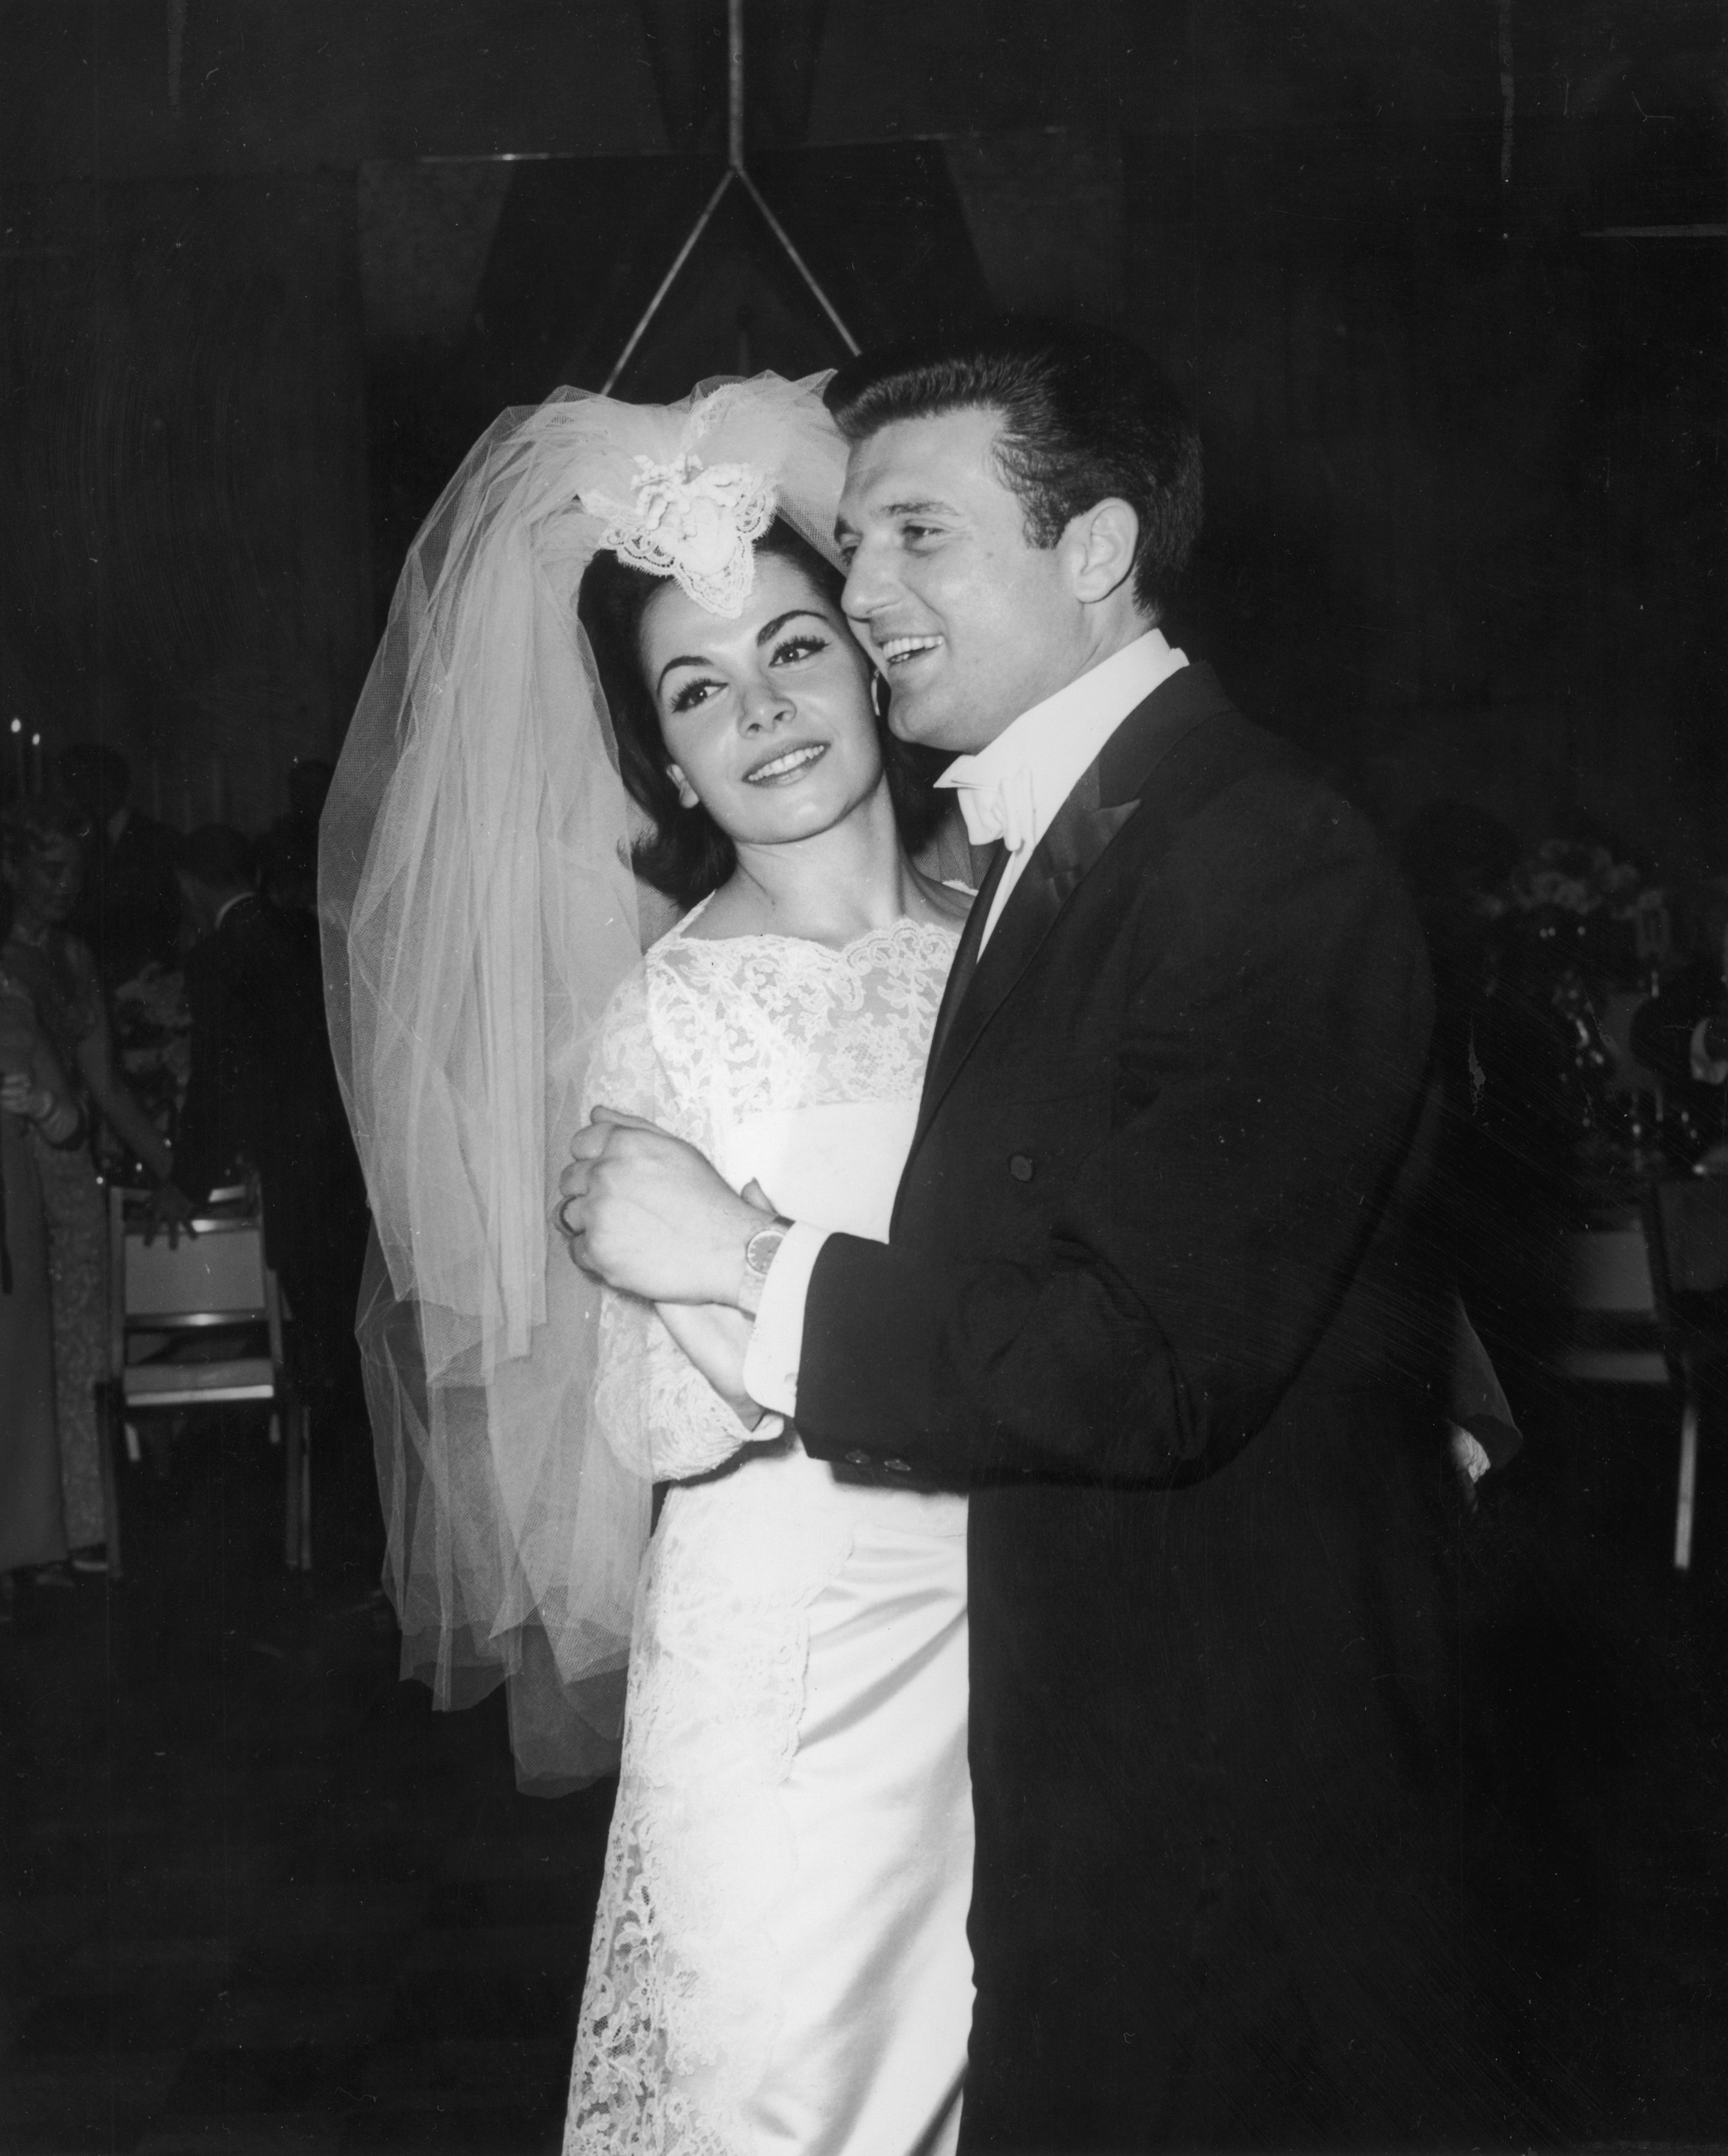 Annette Funicello smiles while dancing with her husband, agent Jack Gilardi, at their wedding reception, 1965 | Source: Getty Images